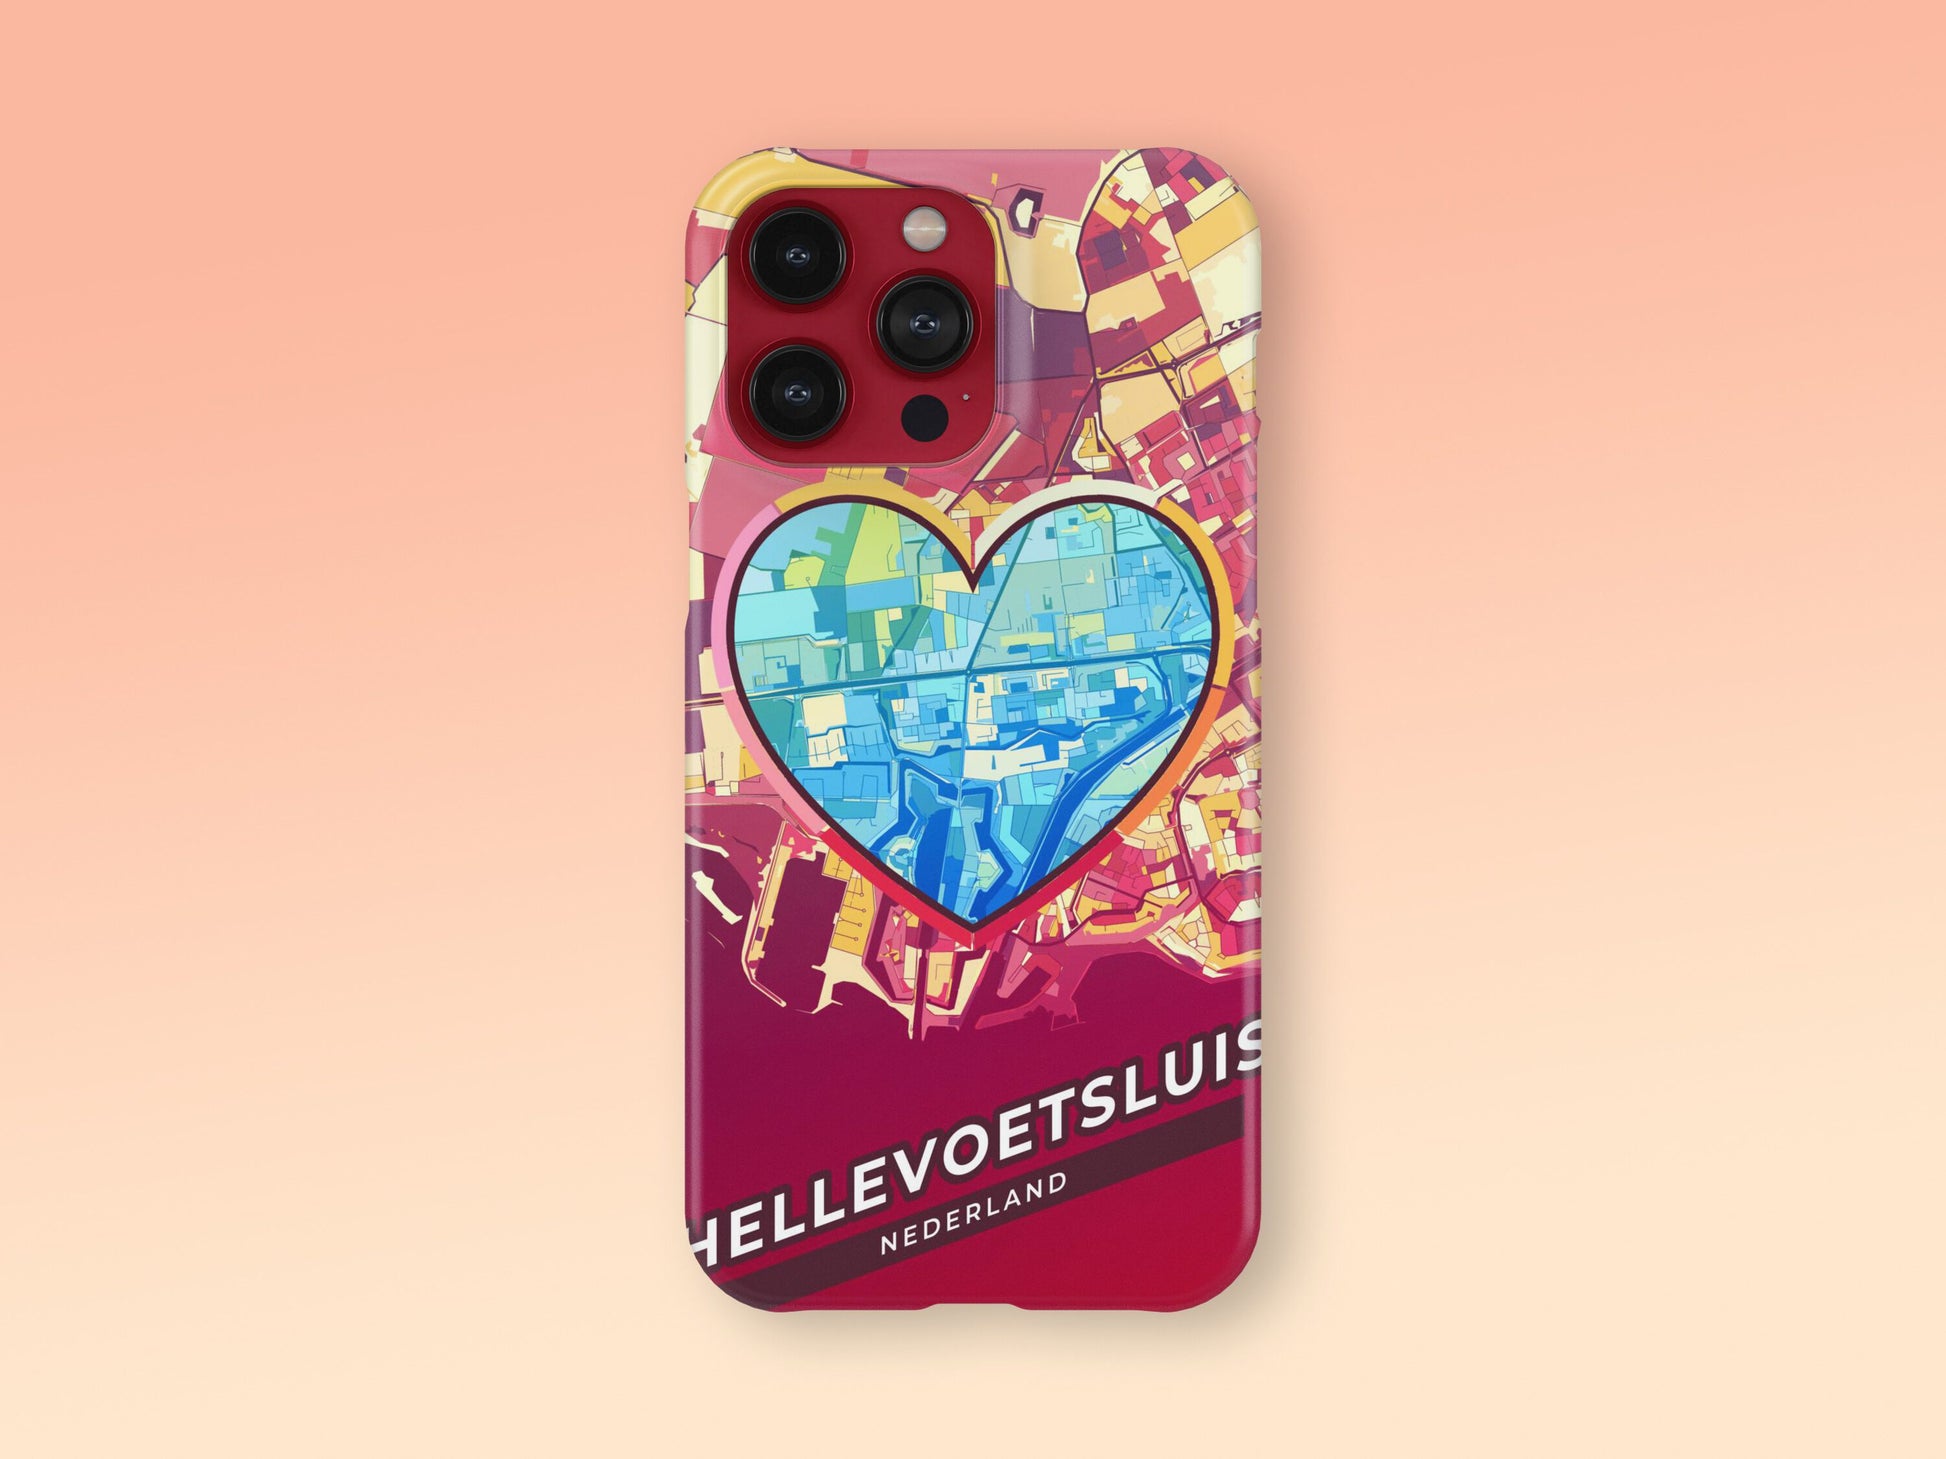 Hellevoetsluis Netherlands slim phone case with colorful icon. Birthday, wedding or housewarming gift. Couple match cases. 2